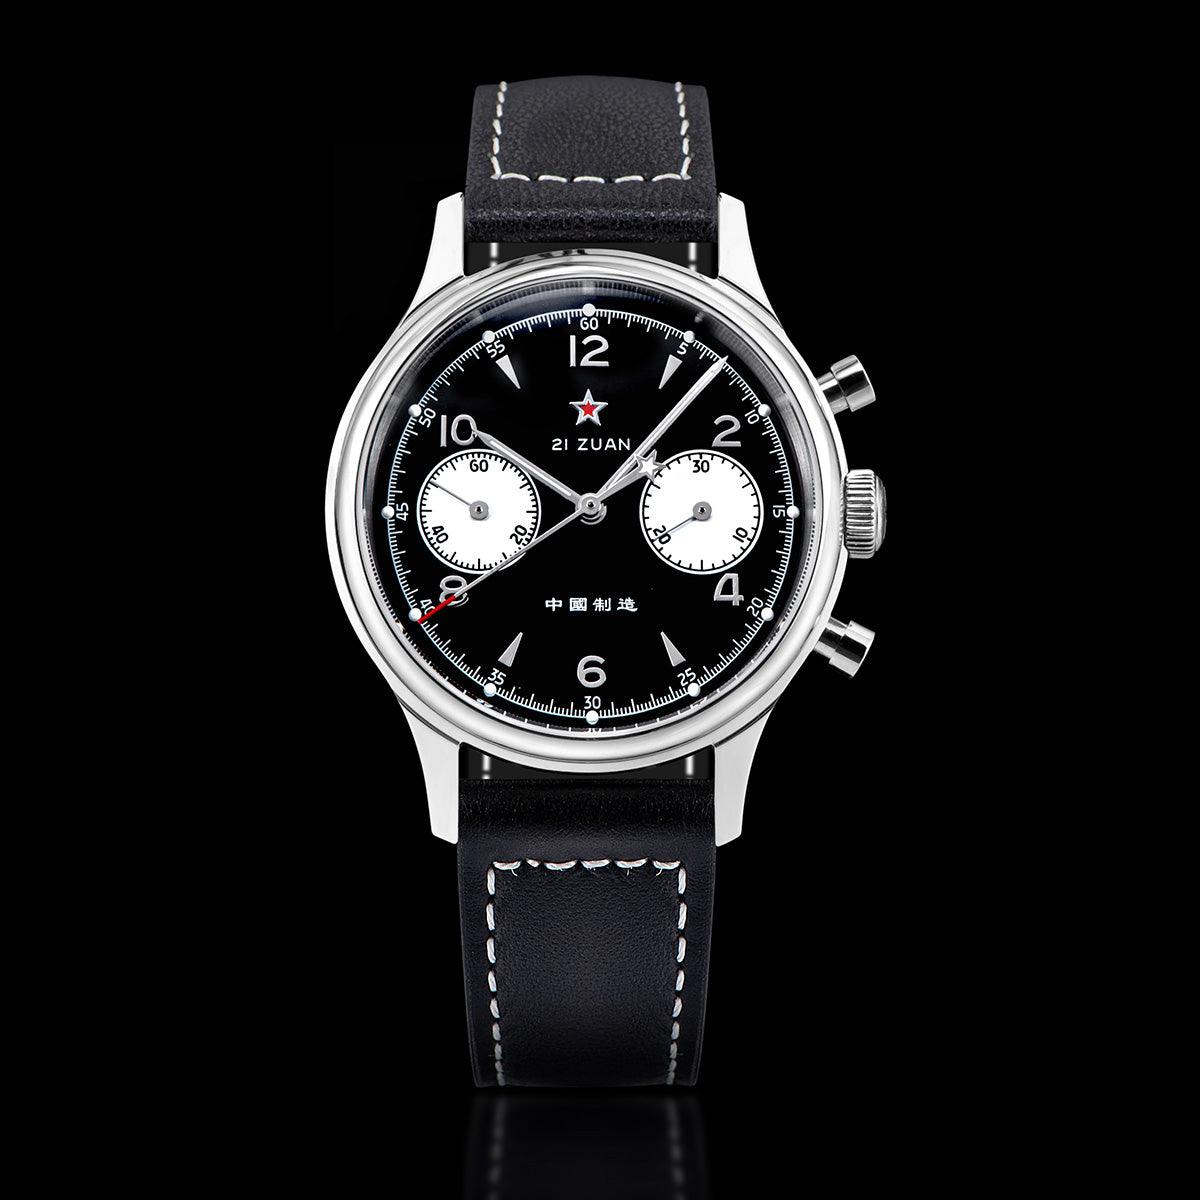 Seagull Black Panda Mechanical Men's Watch with 21 Jewels, ST19 Chronograph, and Sapphire Crystal - Model: ST1901-1 - Murphy Johnson Watches Co.